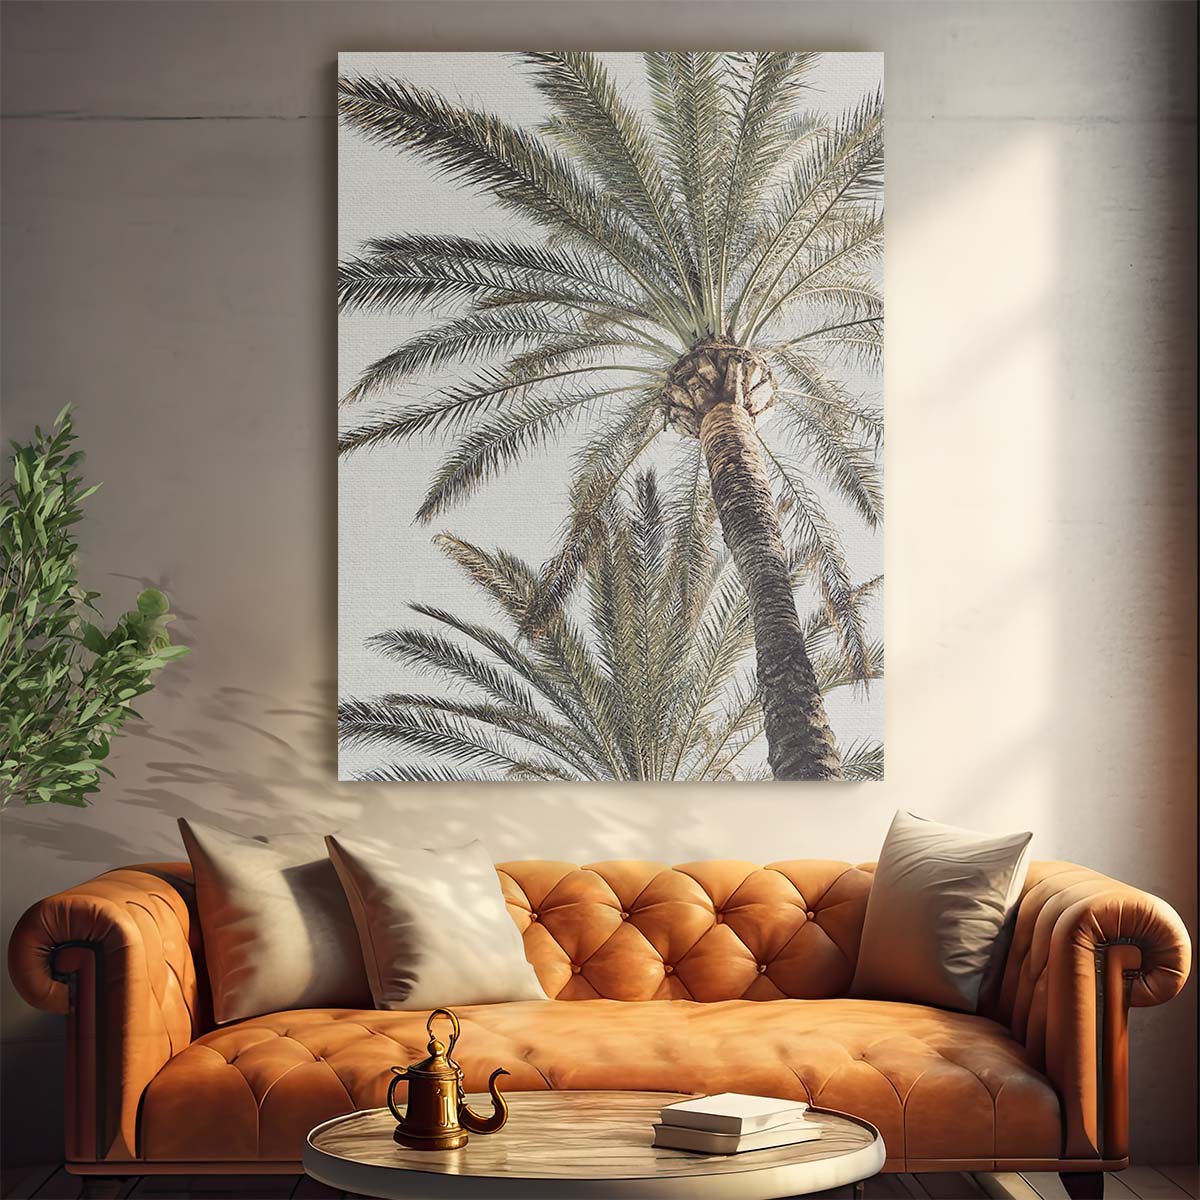 Tropical Paradise Palm Tree Leaves Landscape Photography Wall Art by Luxuriance Designs, made in USA